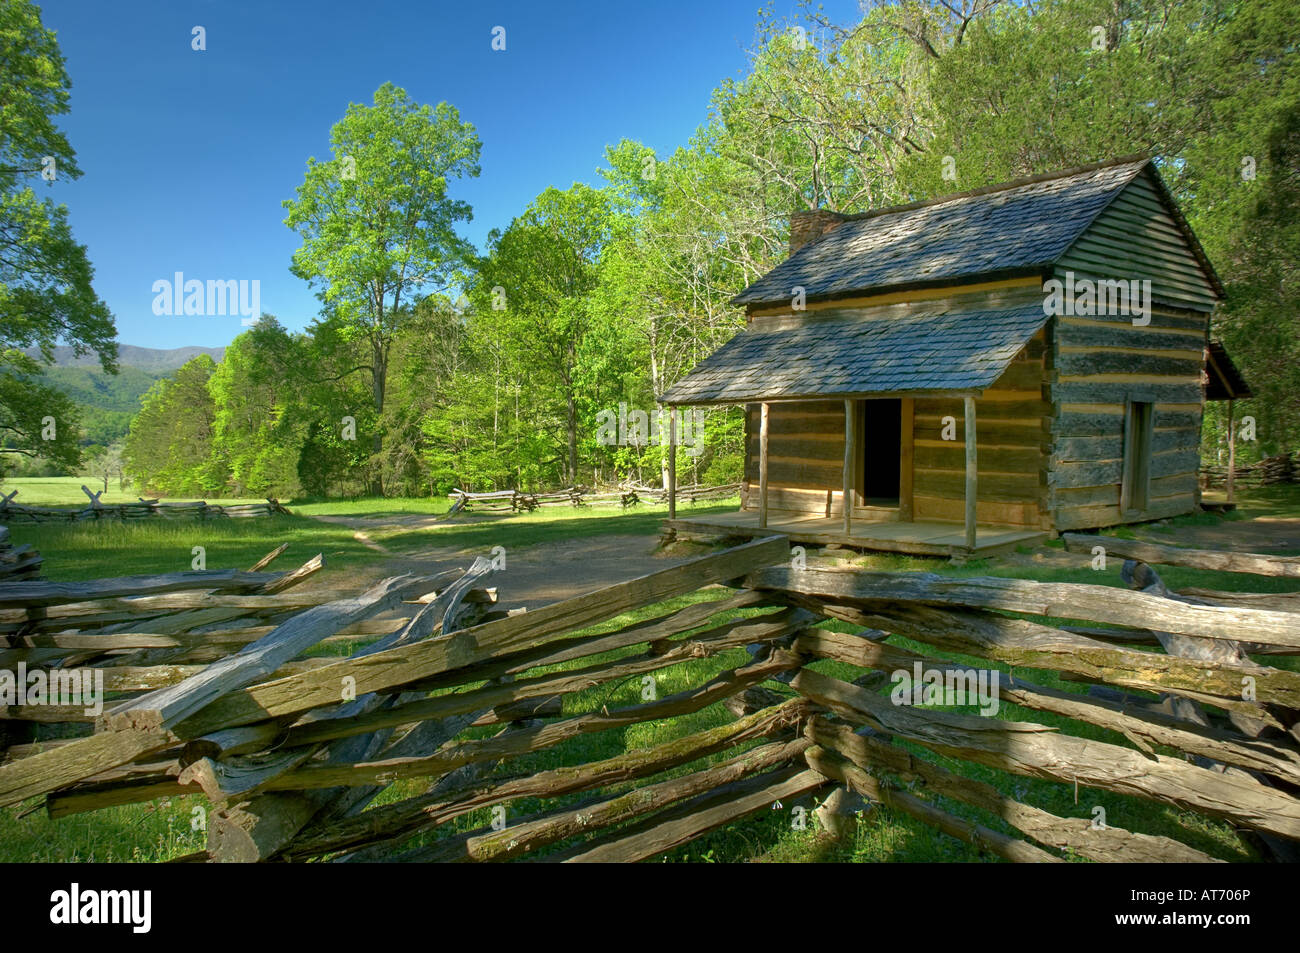 An unusual view of John Olivers Cabin in Great Smoky Mountains National Park, Tennessee, USA. Photo by Darrell Young. Stock Photo